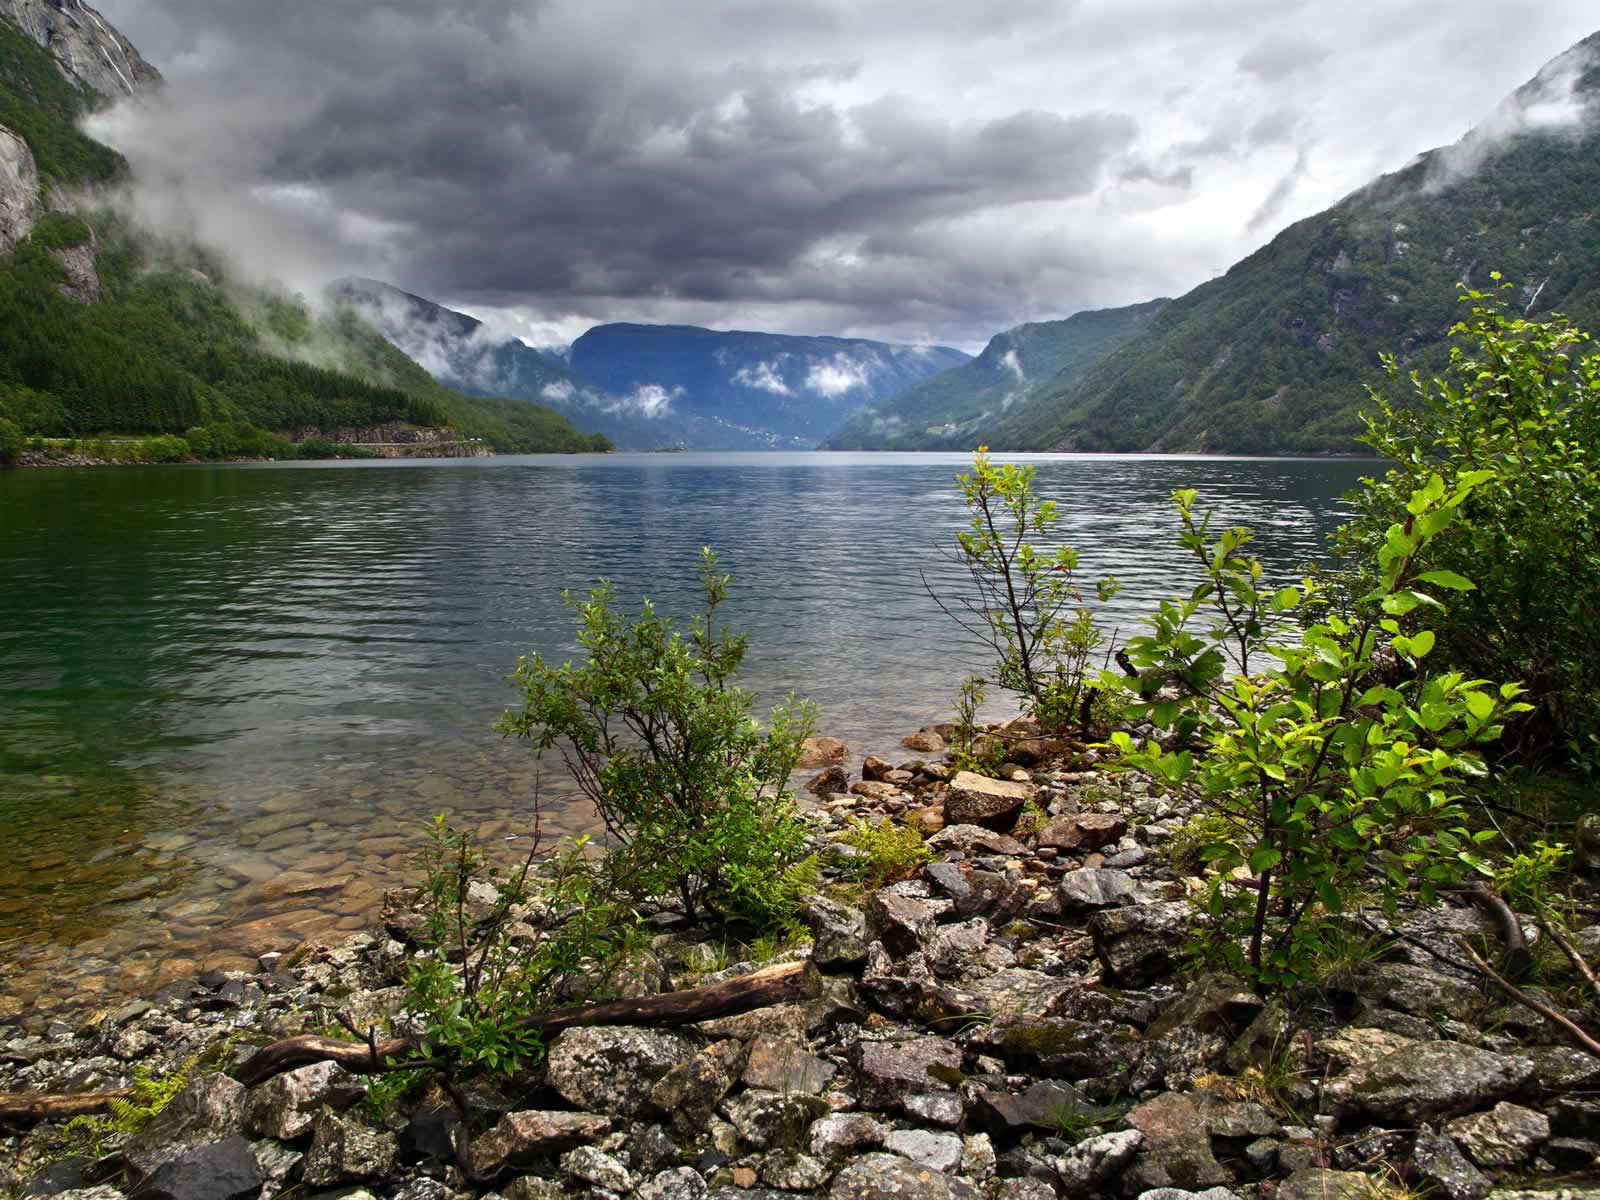 A body of water with trees and mountains in the background.